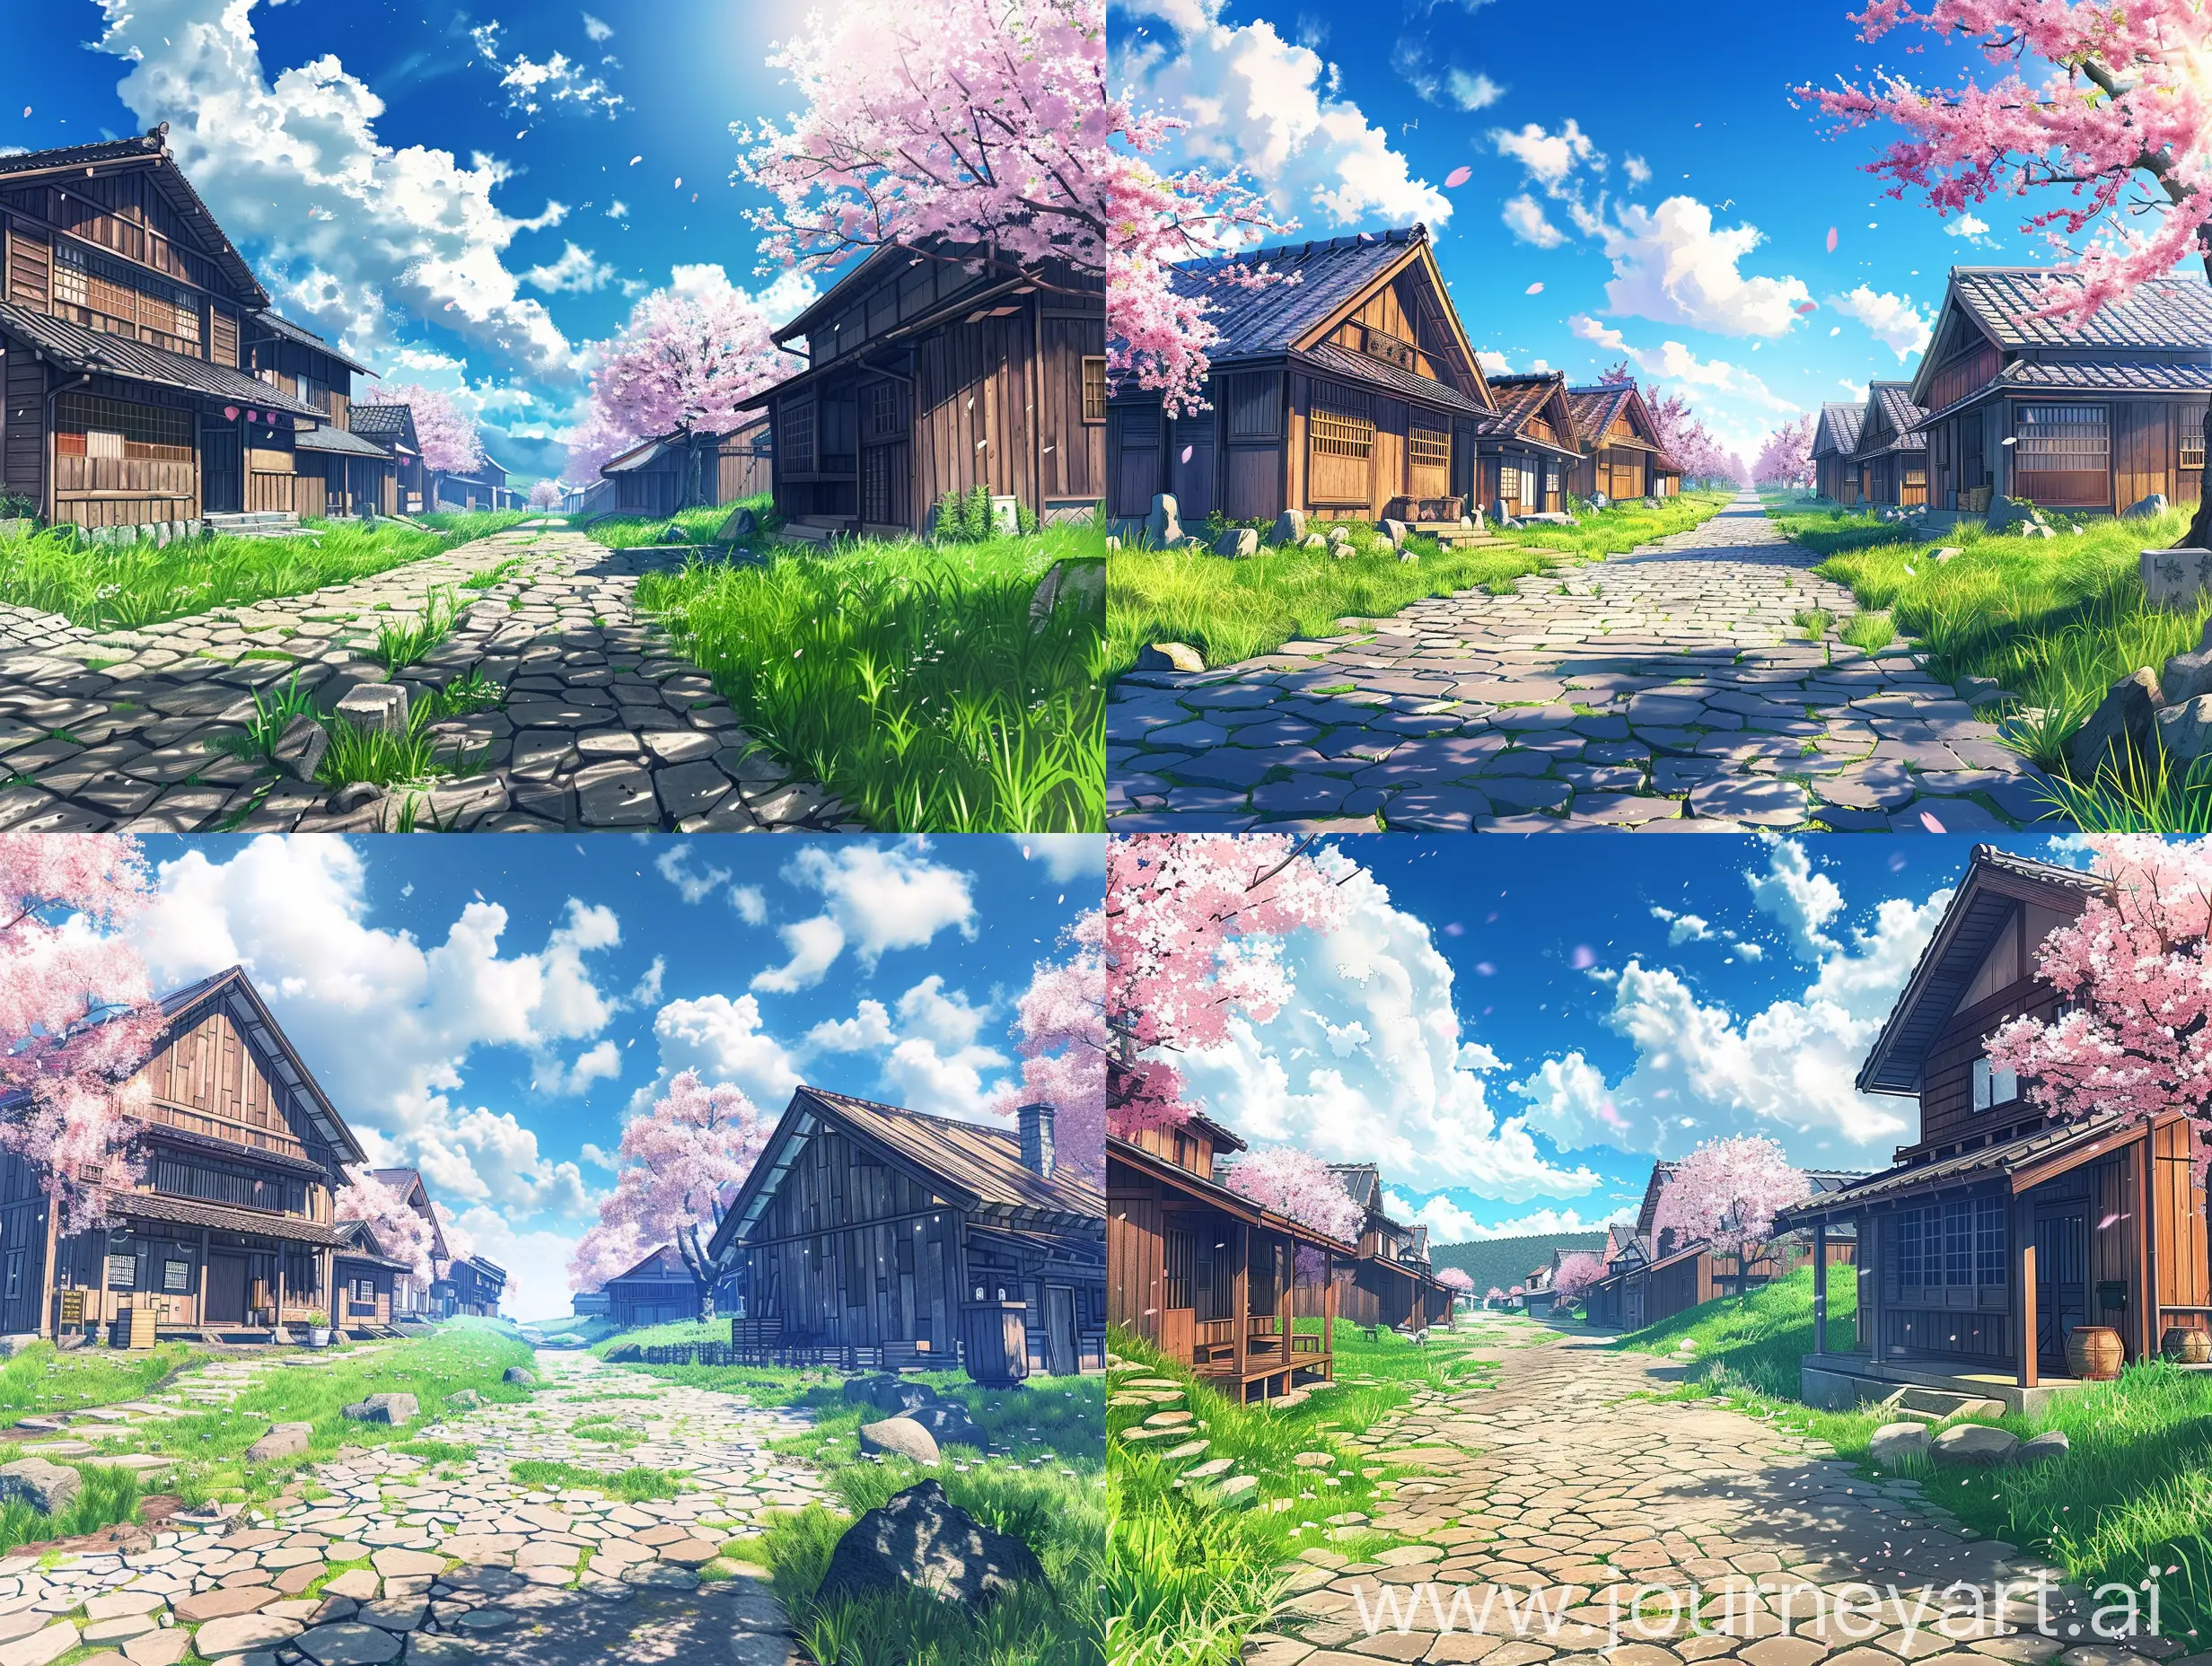 Tranquil-Rural-Japanese-Landscape-with-Wooden-Houses-and-Sakura-Trees-under-Sunny-Blue-Sky